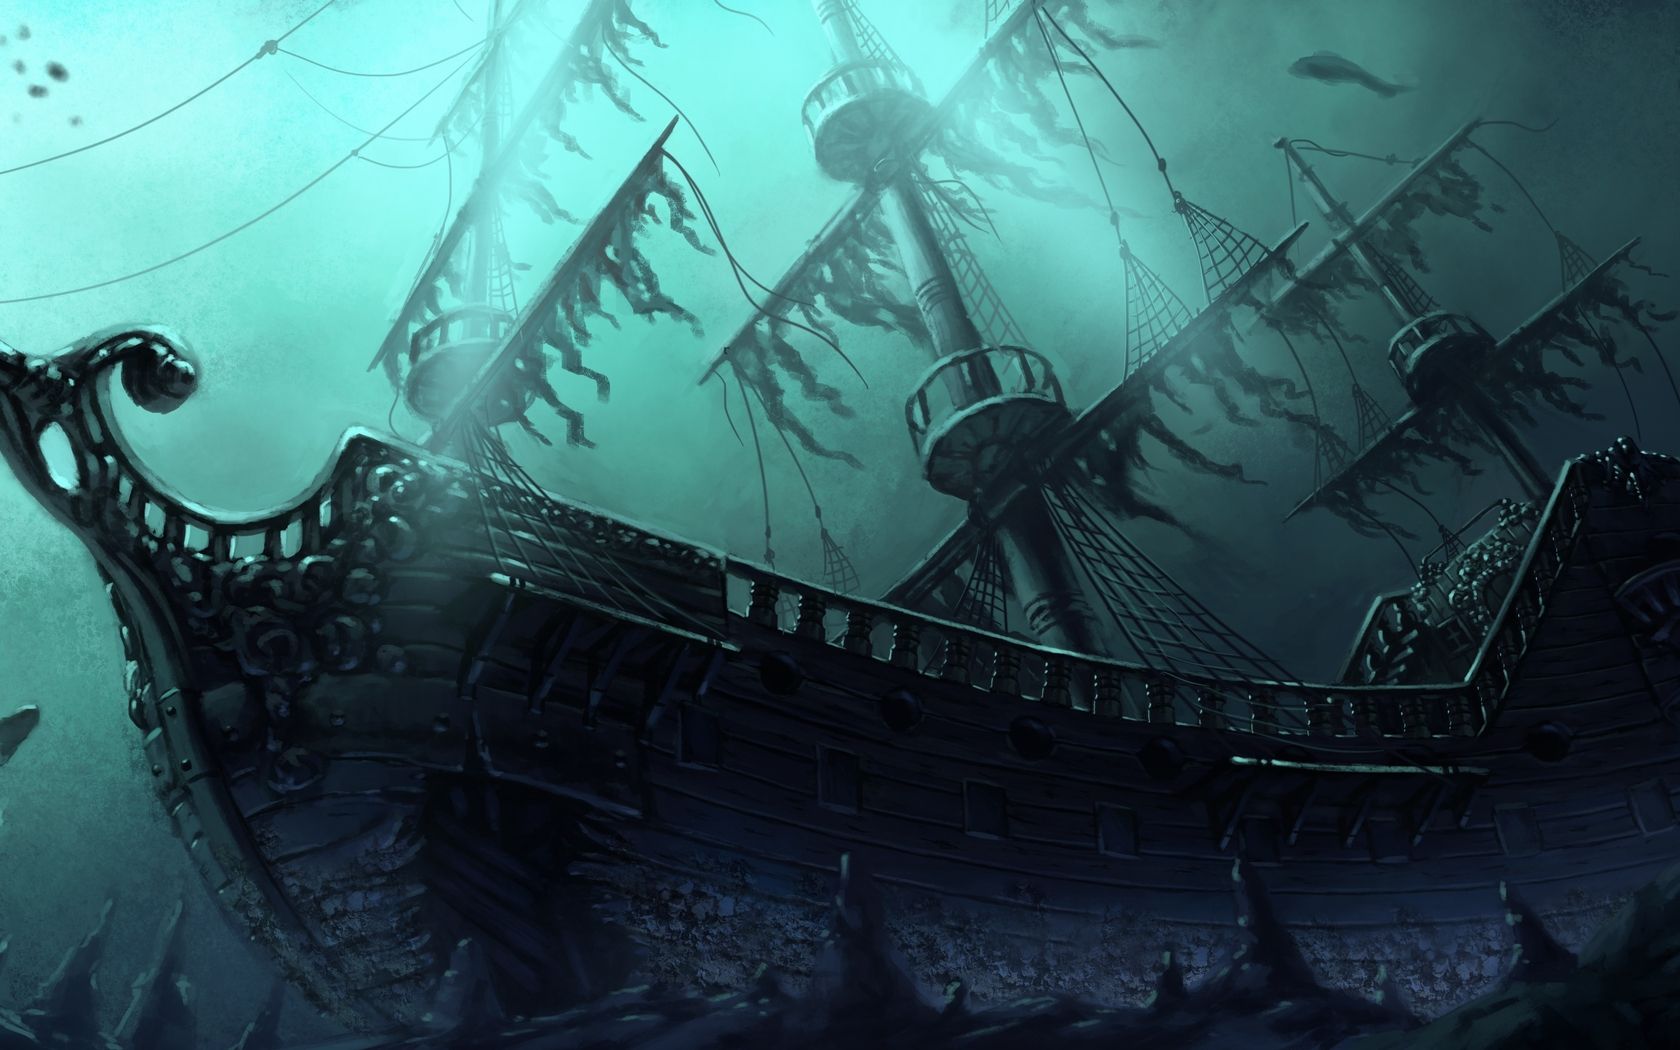 Visit the post for more. Pirate ship, Ship paintings, Ghost ship